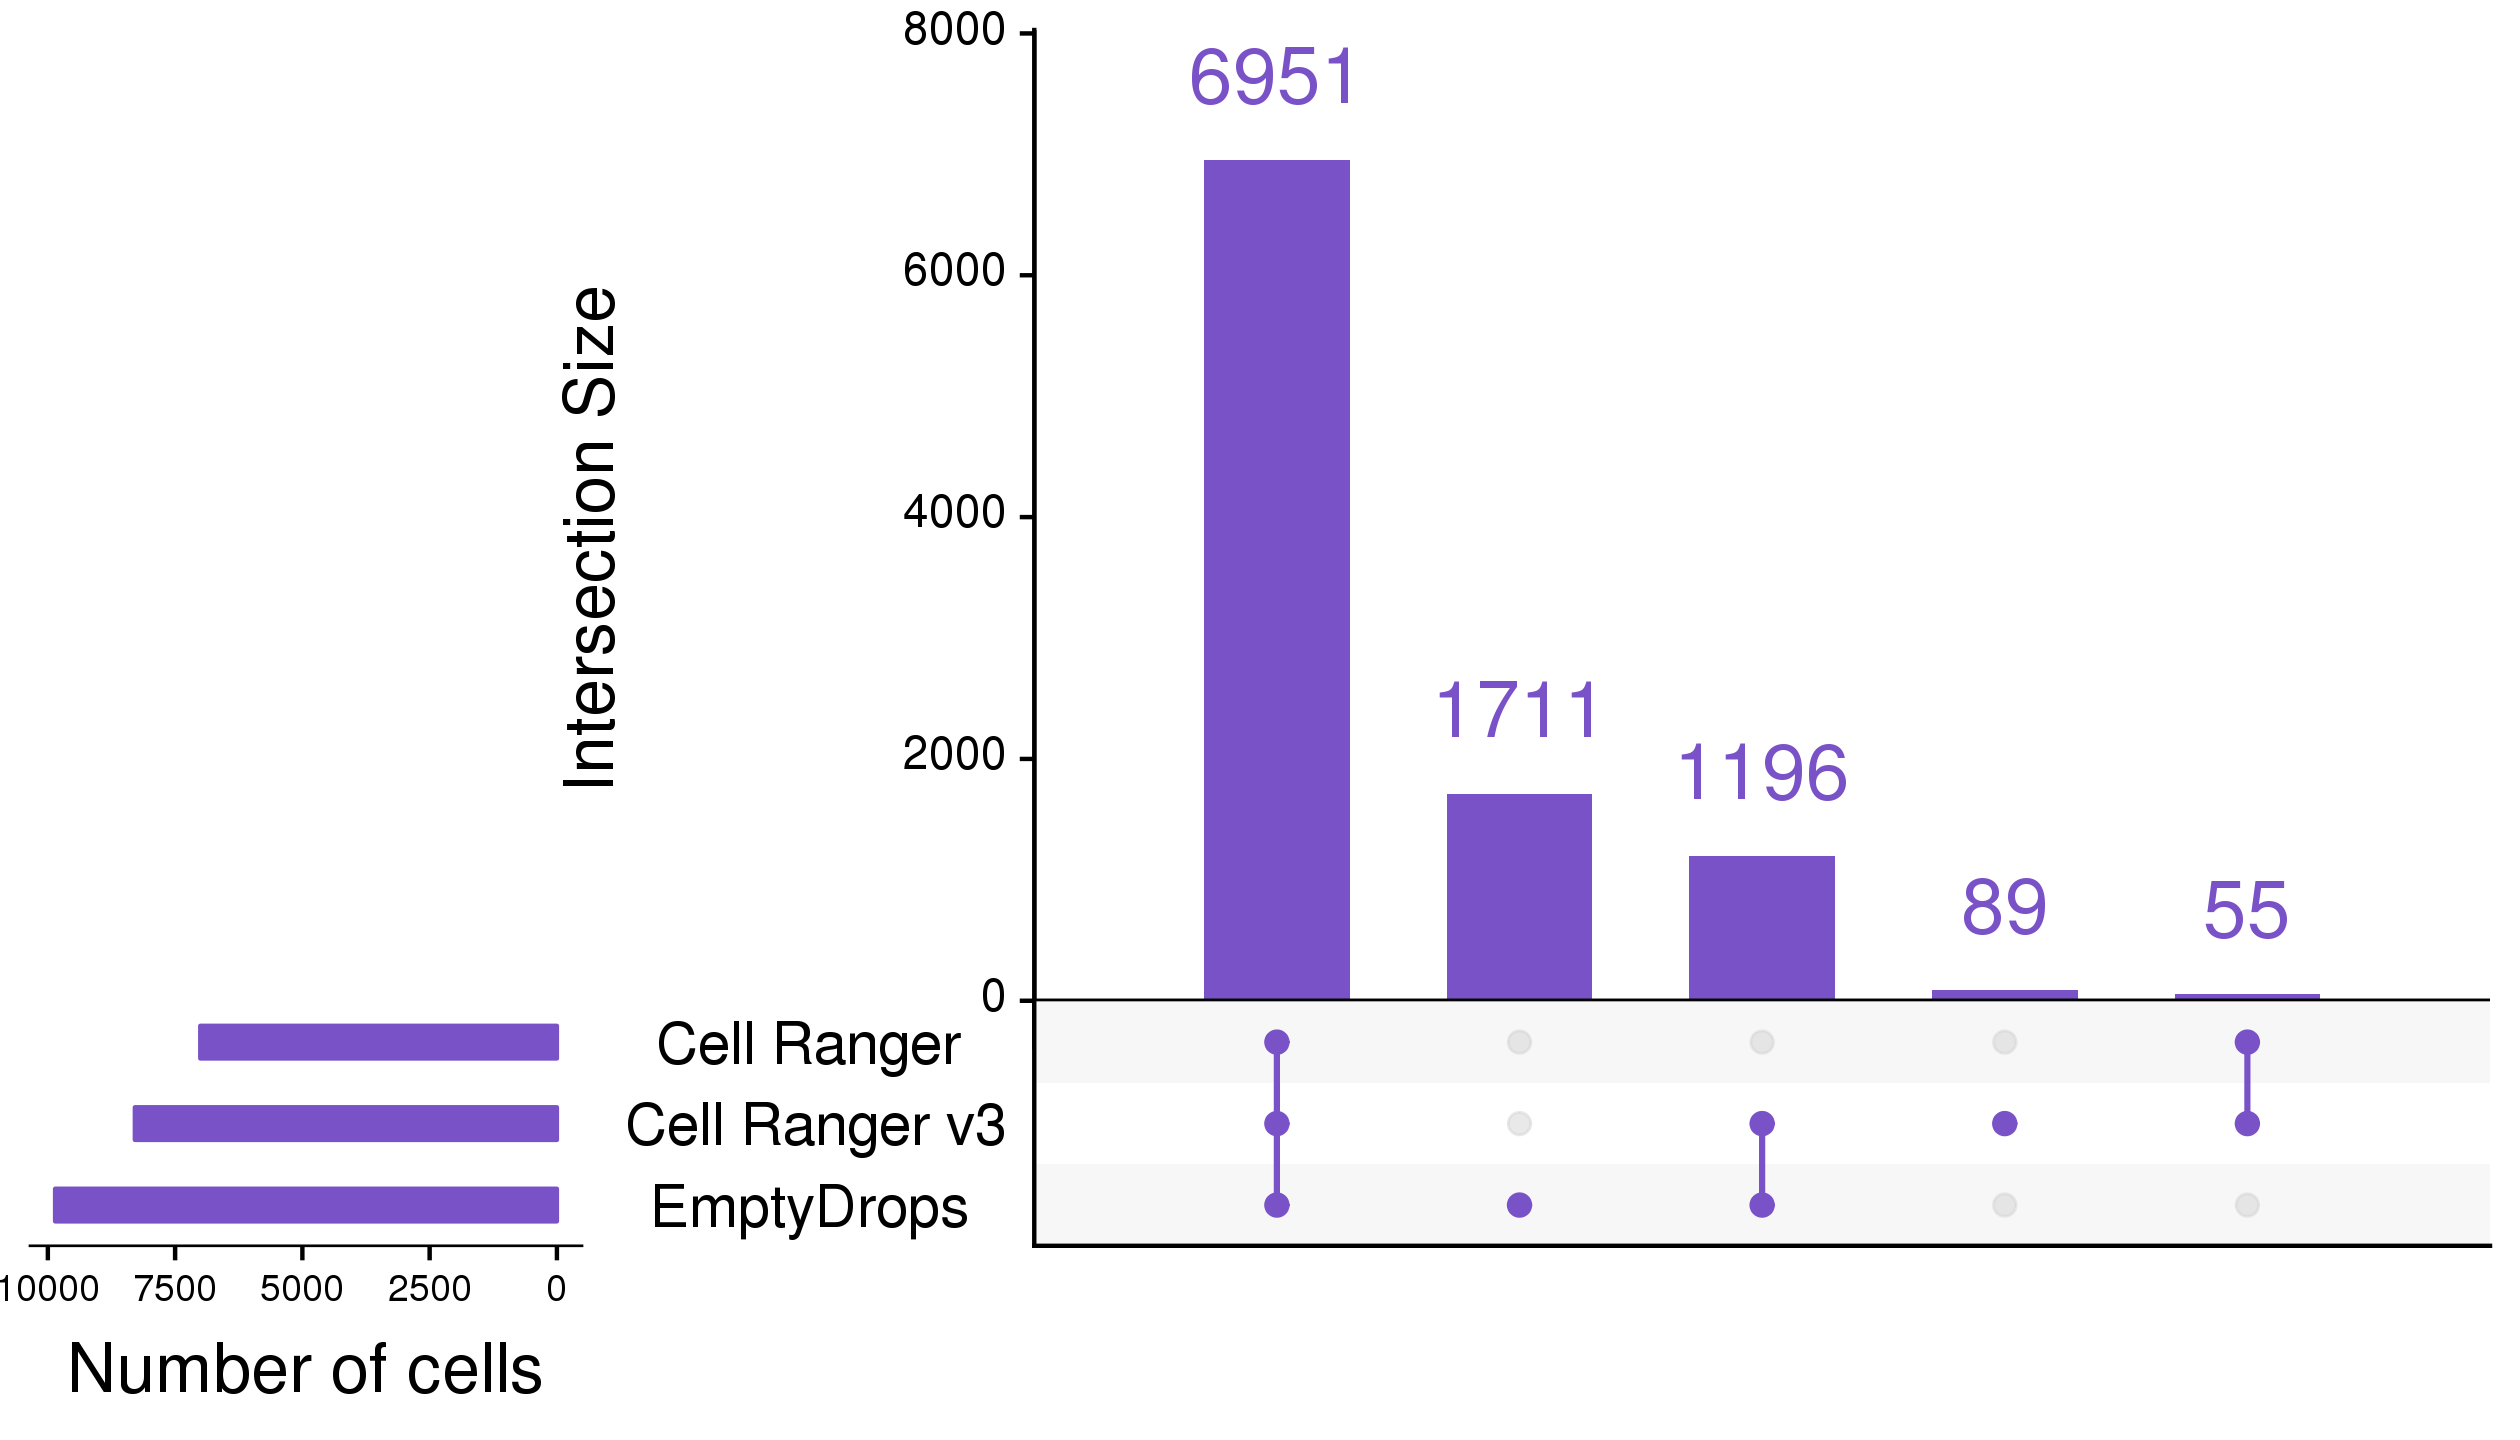 UpSet plot [218] comparing droplet selection methods. Cell Ranger v3 and EmptyDrops identify significantly more cells than the traditional Cell Ranger approach. My use of EmptyDrops also identifies a set of cells that are overlooked by the automated Cell Ranger v3 procedure.